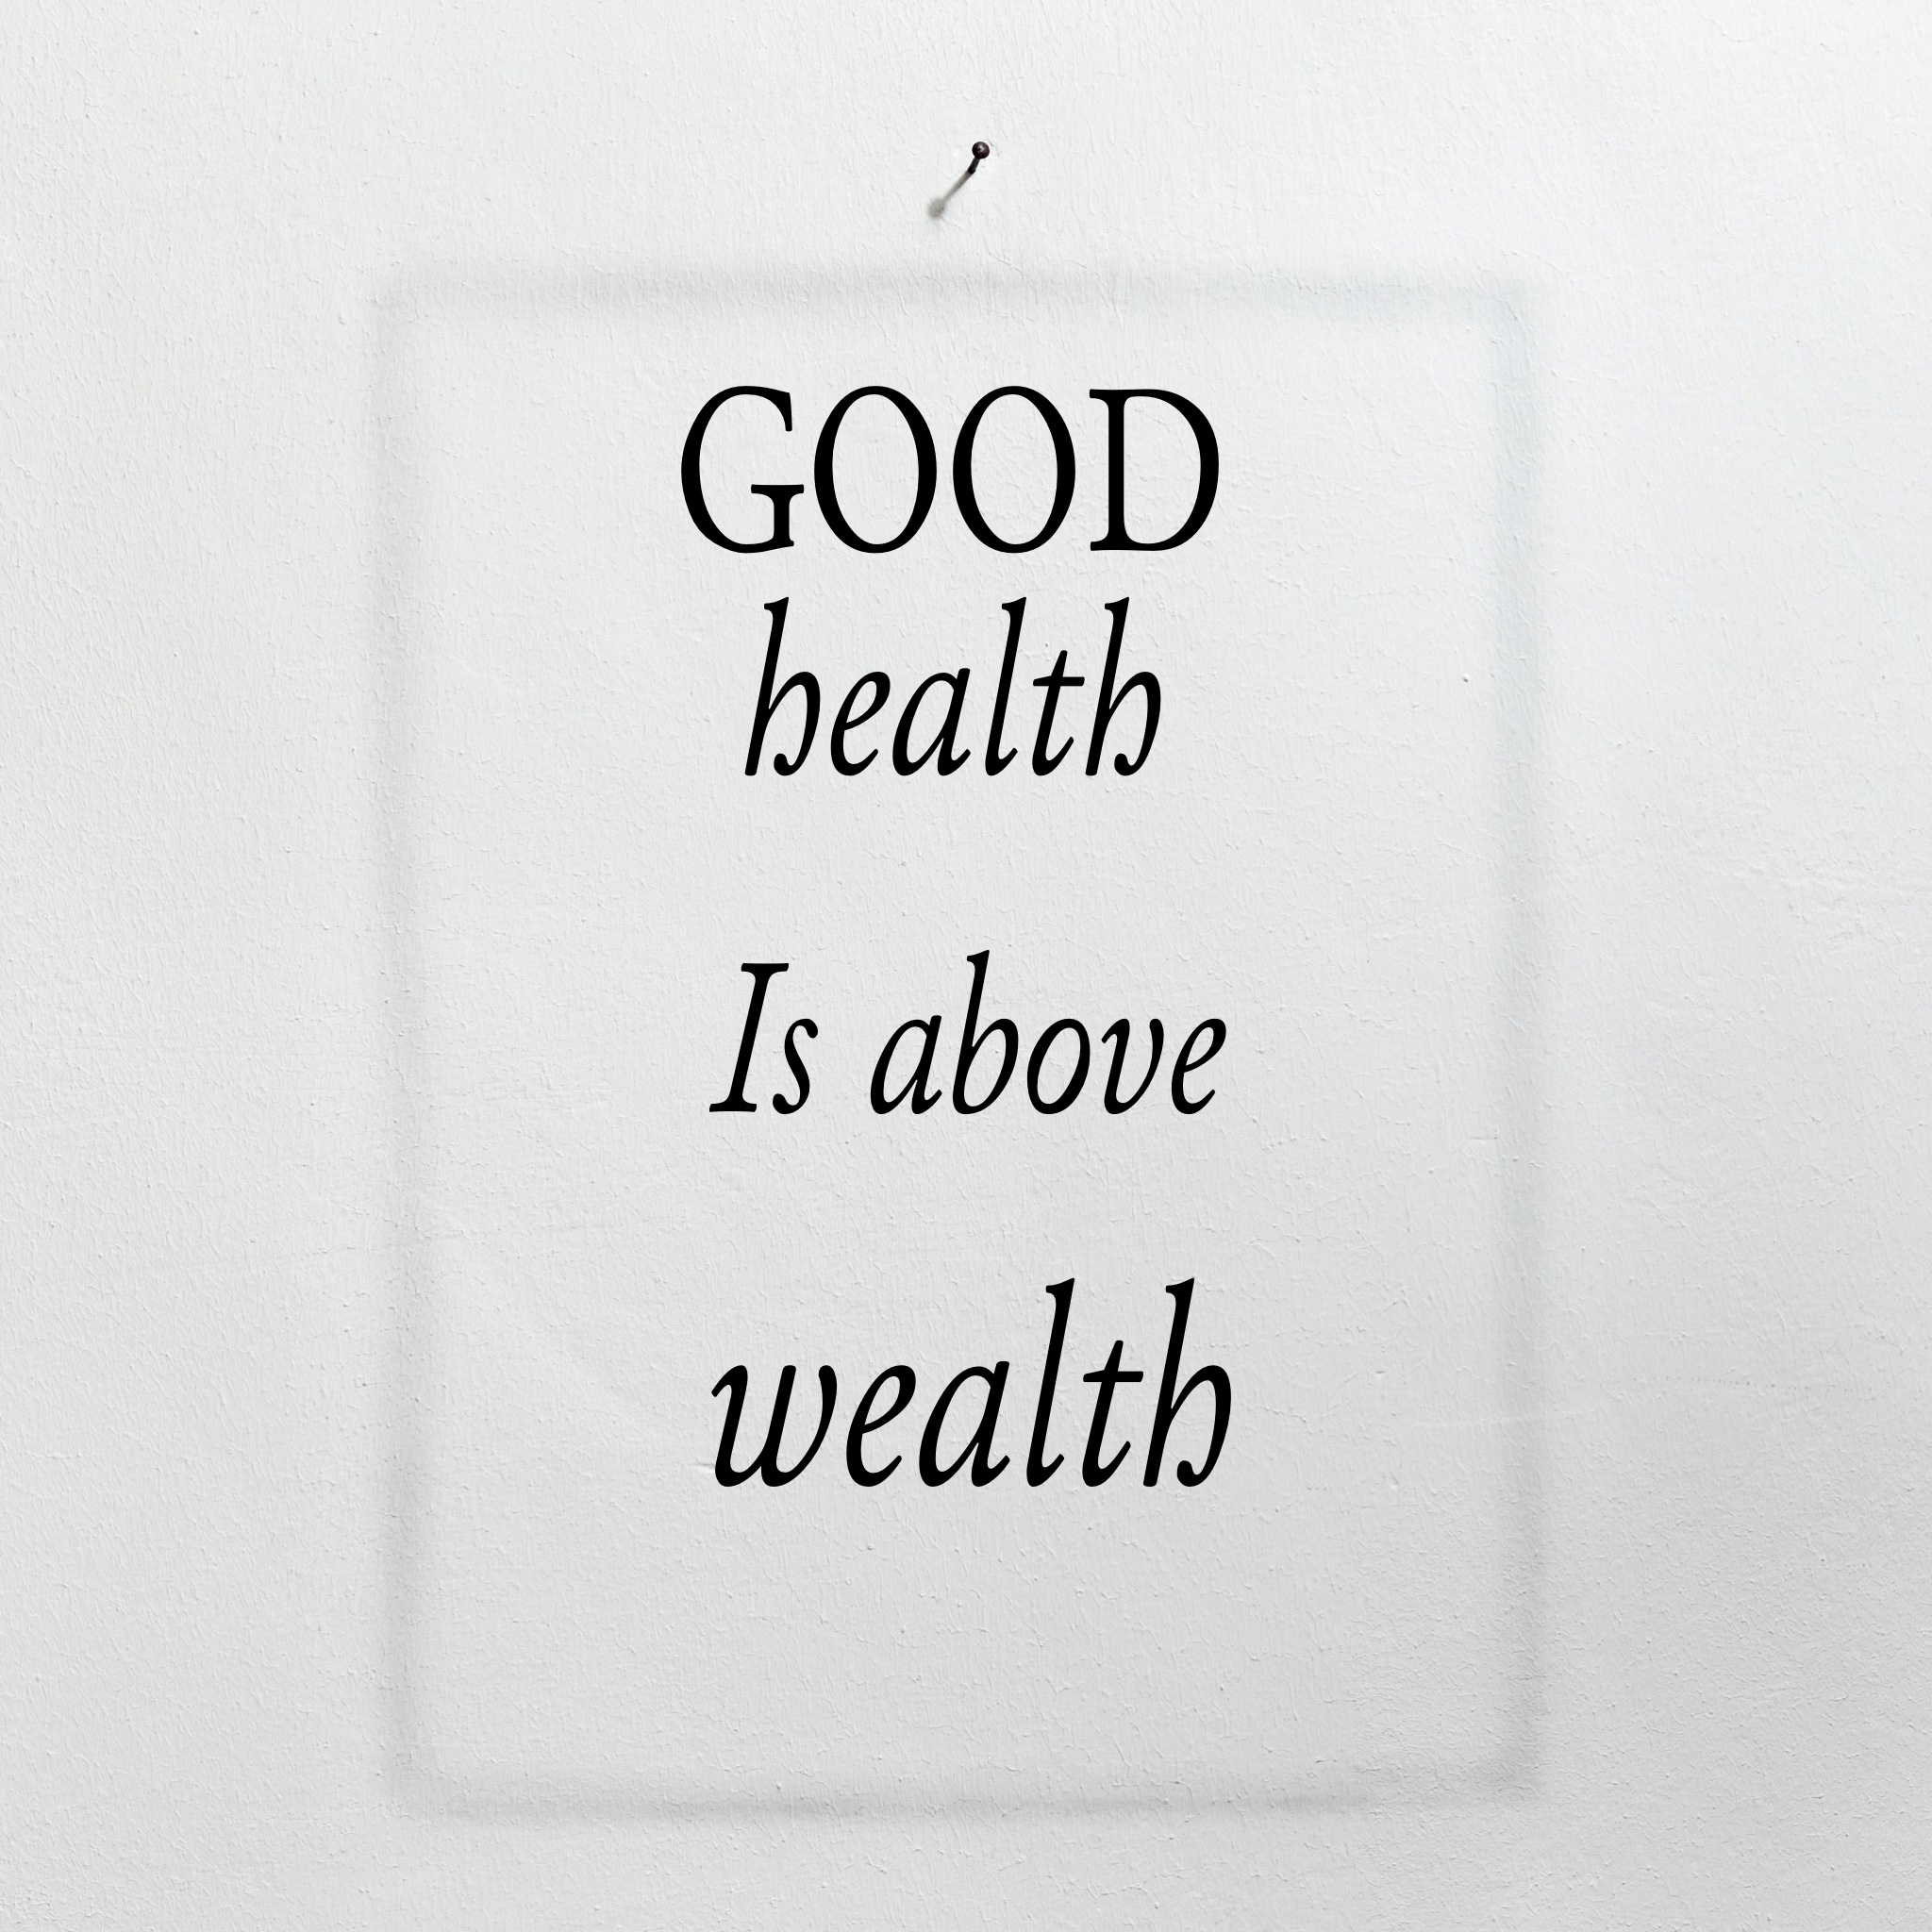 Weekly Tip - Good health comes above wealth